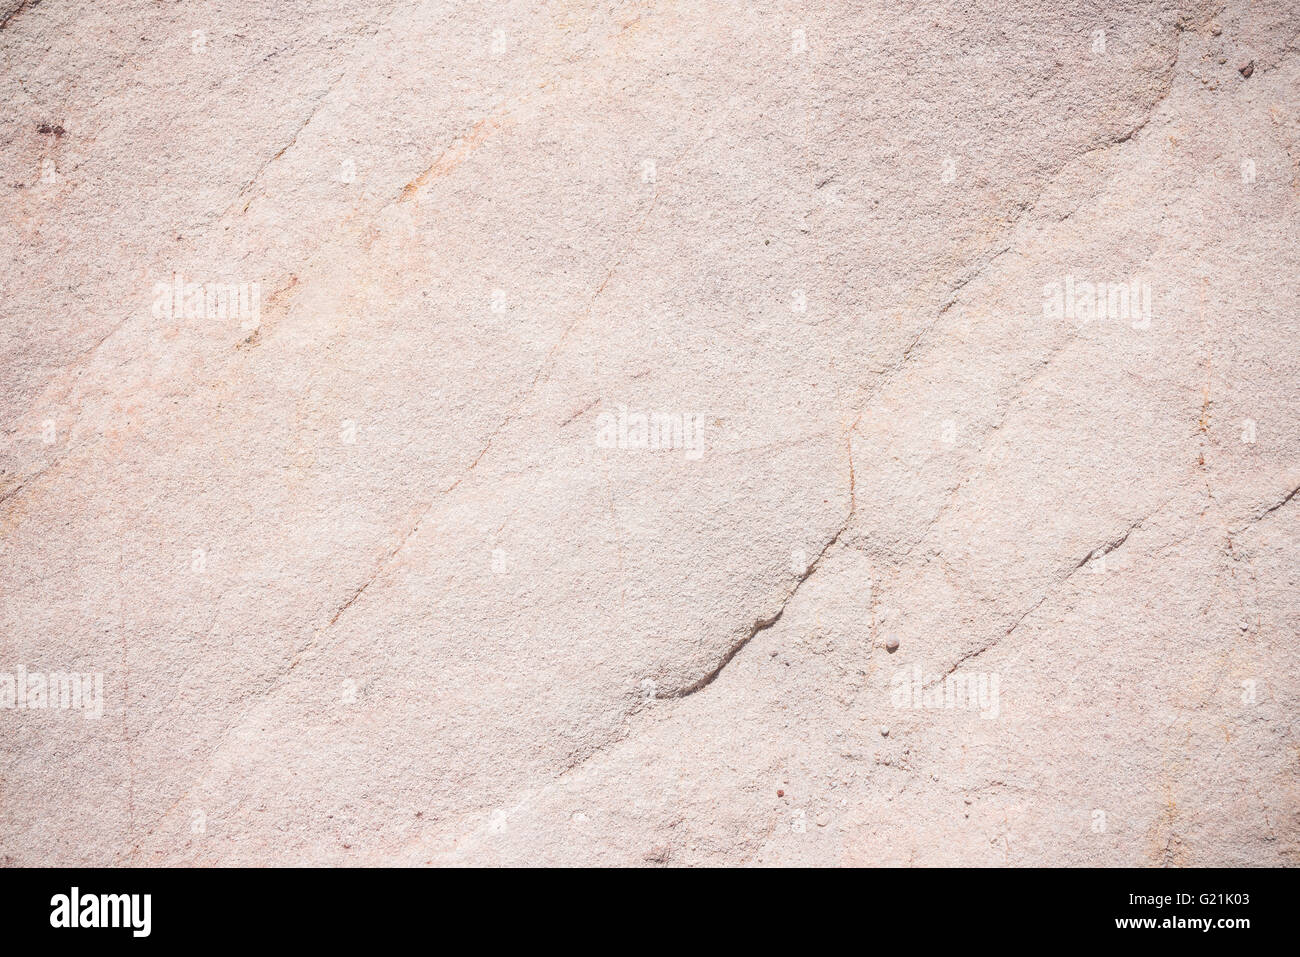 Sedimentary rock, fine grained omogeneous sandstone, with fractures and alteration pattern. Natural background, pattern and text Stock Photo